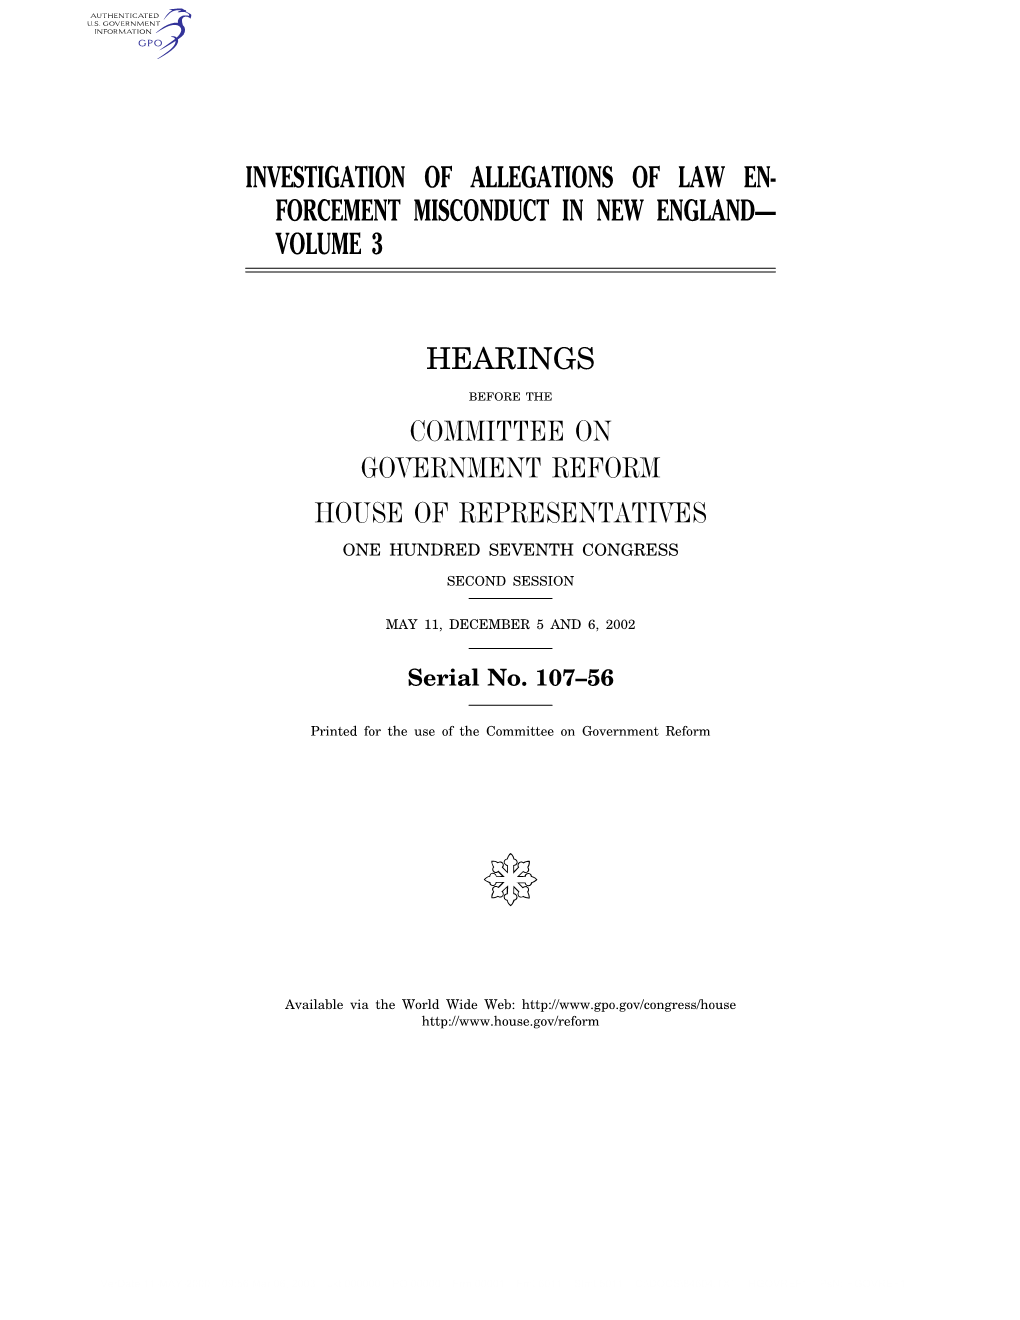 Investigation of Allegations of Law En- Forcement Misconduct in New England— Volume 3